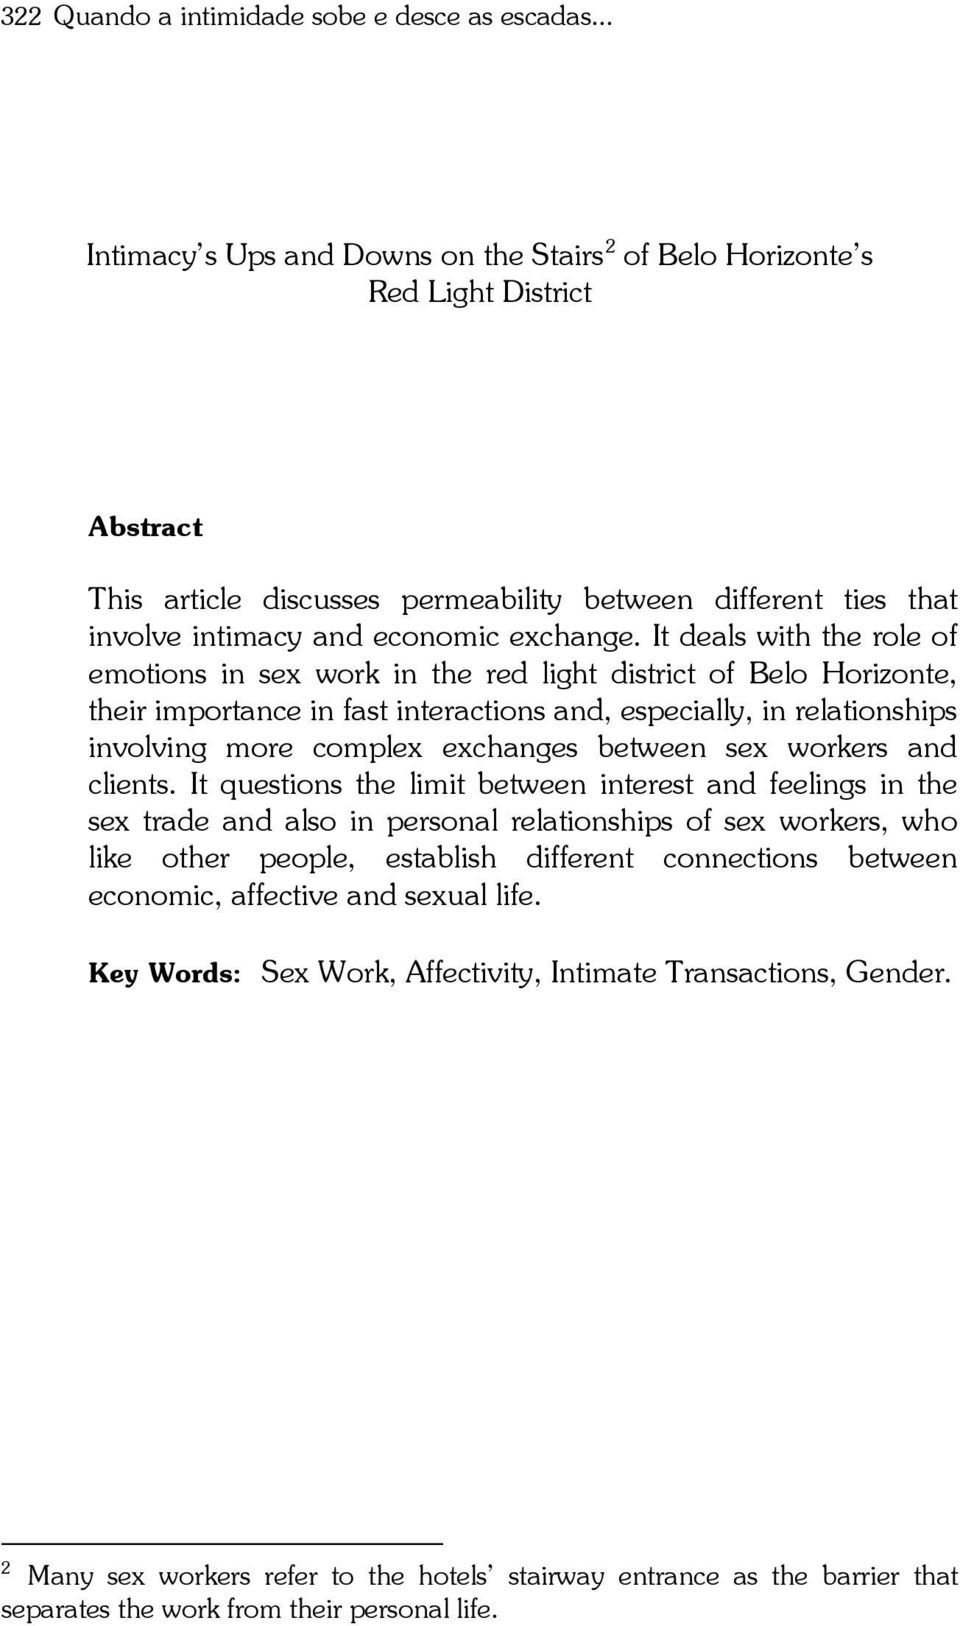 It deals with the role of emotions in sex work in the red light district of Belo Horizonte, their importance in fast interactions and, especially, in relationships involving more complex exchanges